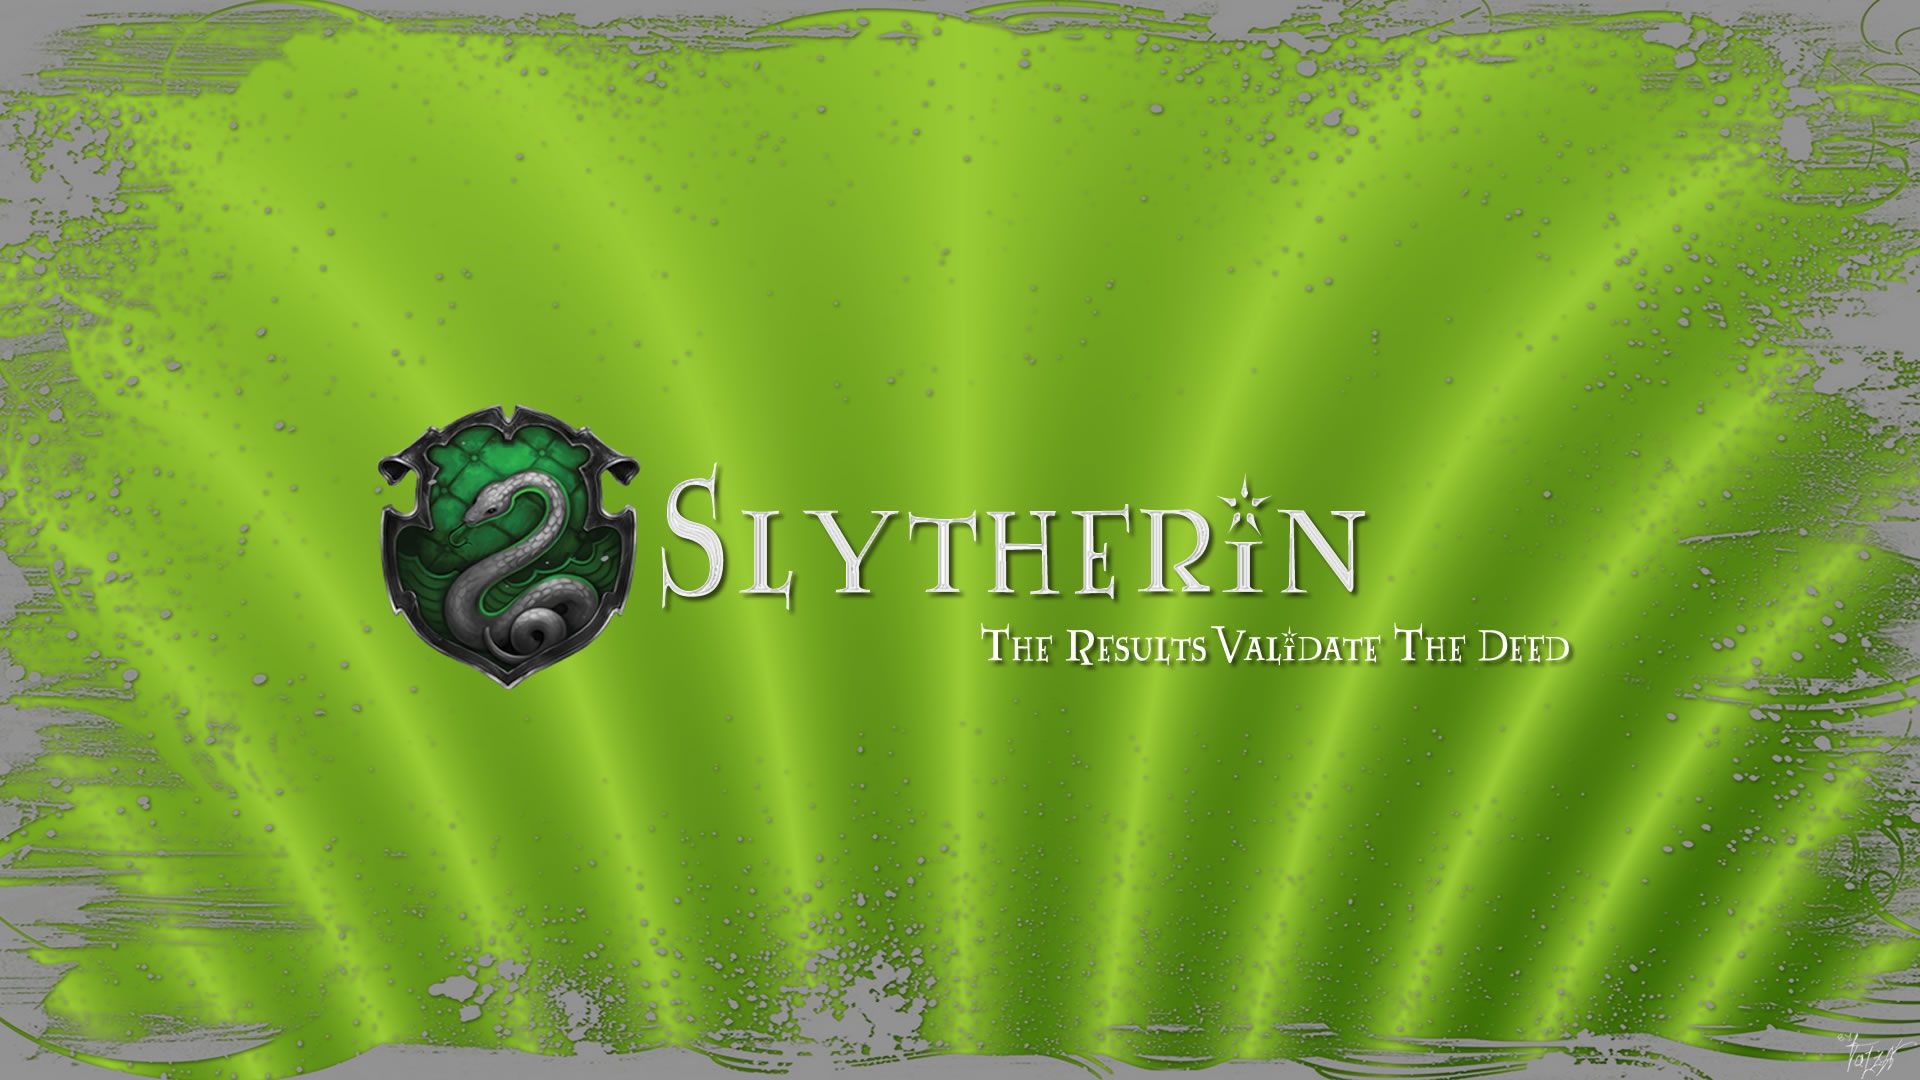 Slytherin Wallpaper Quotes. QuotesGram